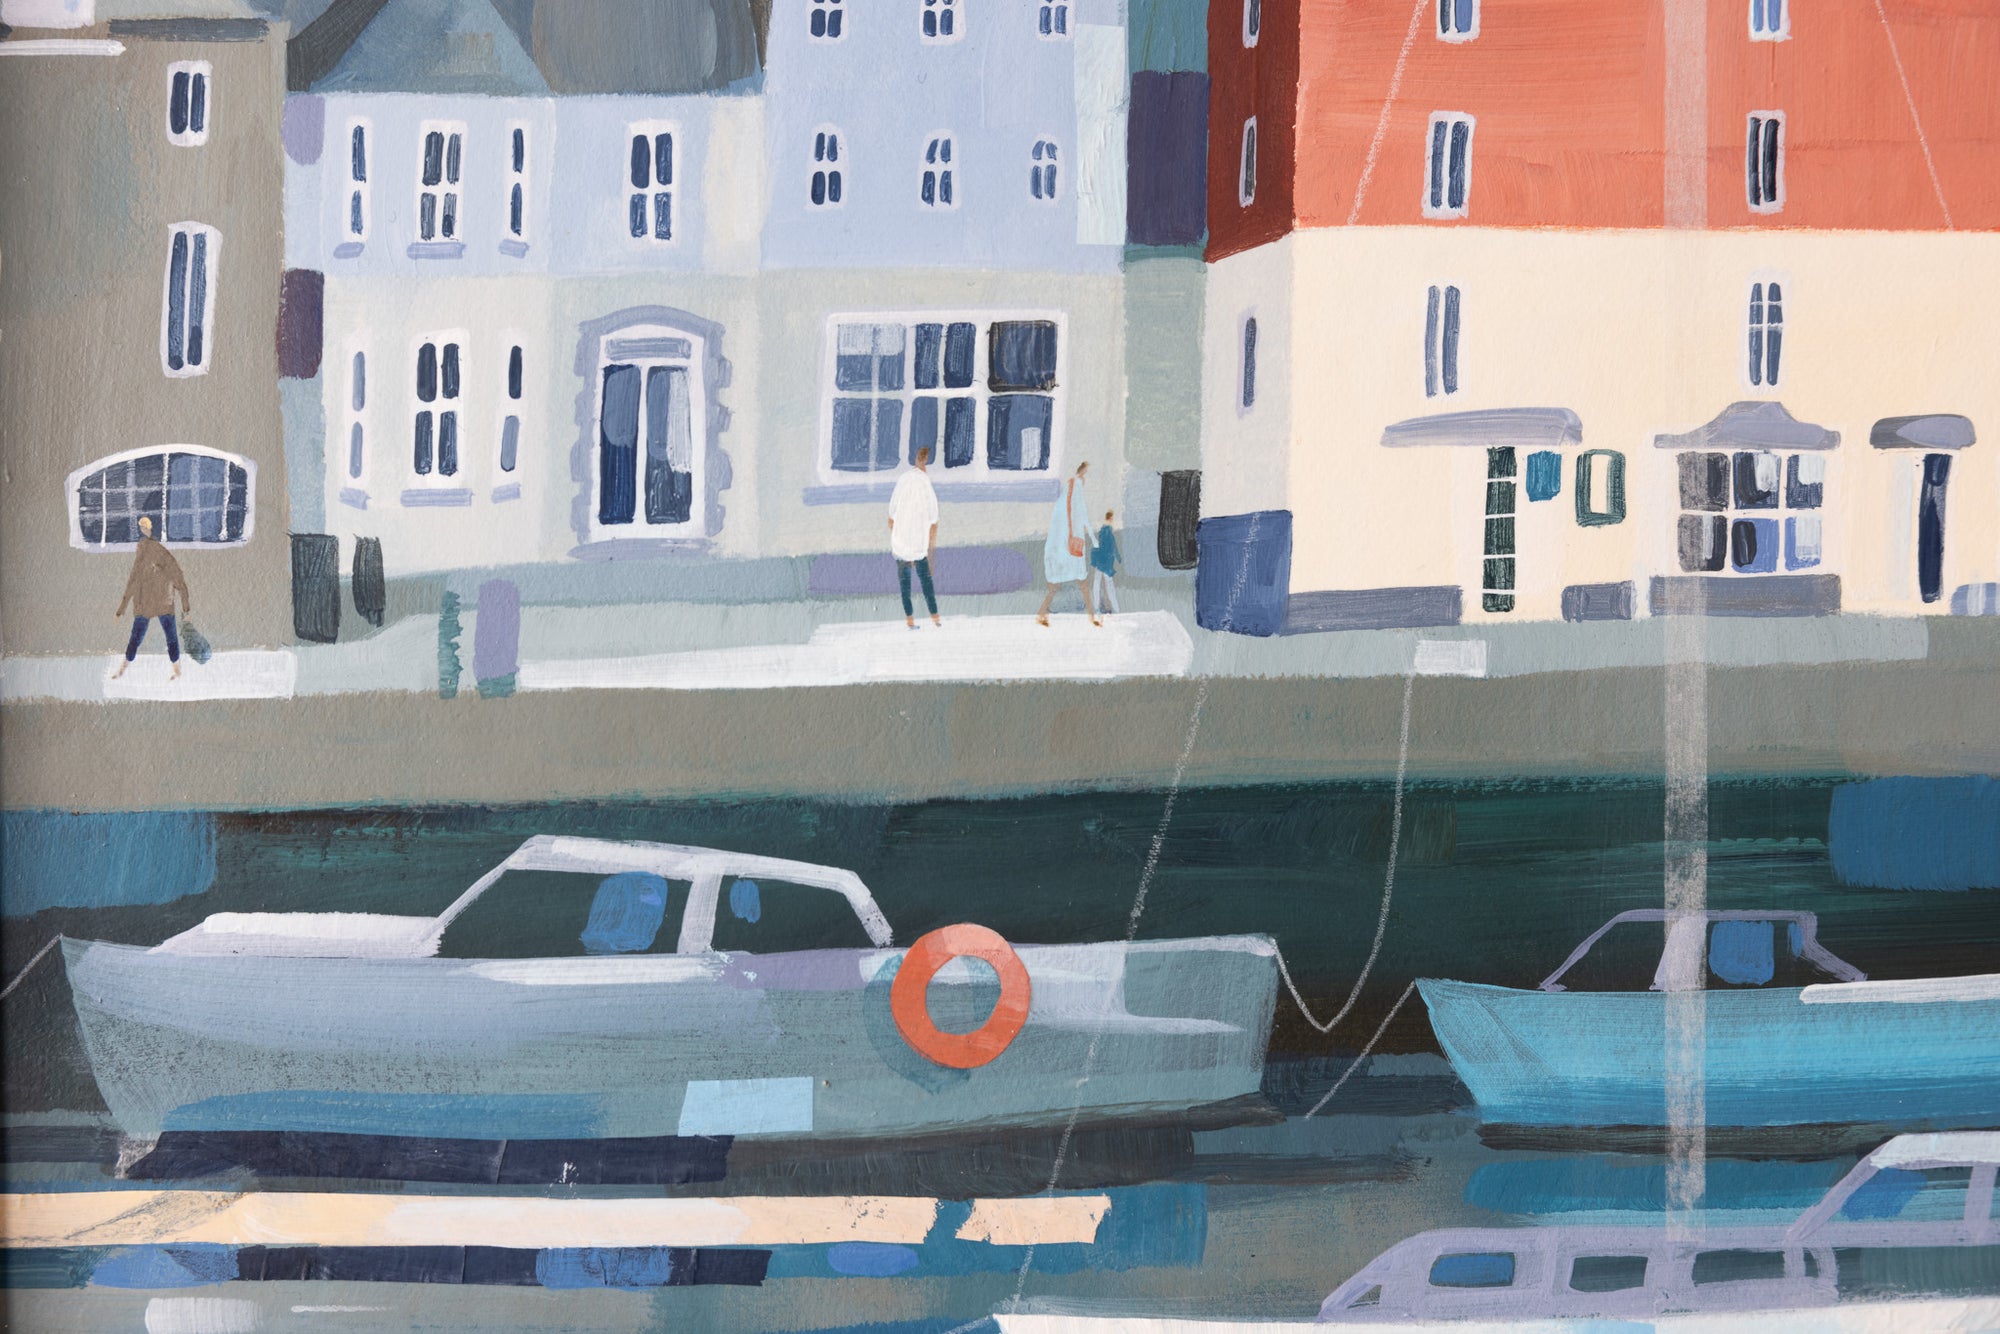 'Padstow South Quay' a mixed media original by Claire Henley, available at Padstow Gallery, Cornwall